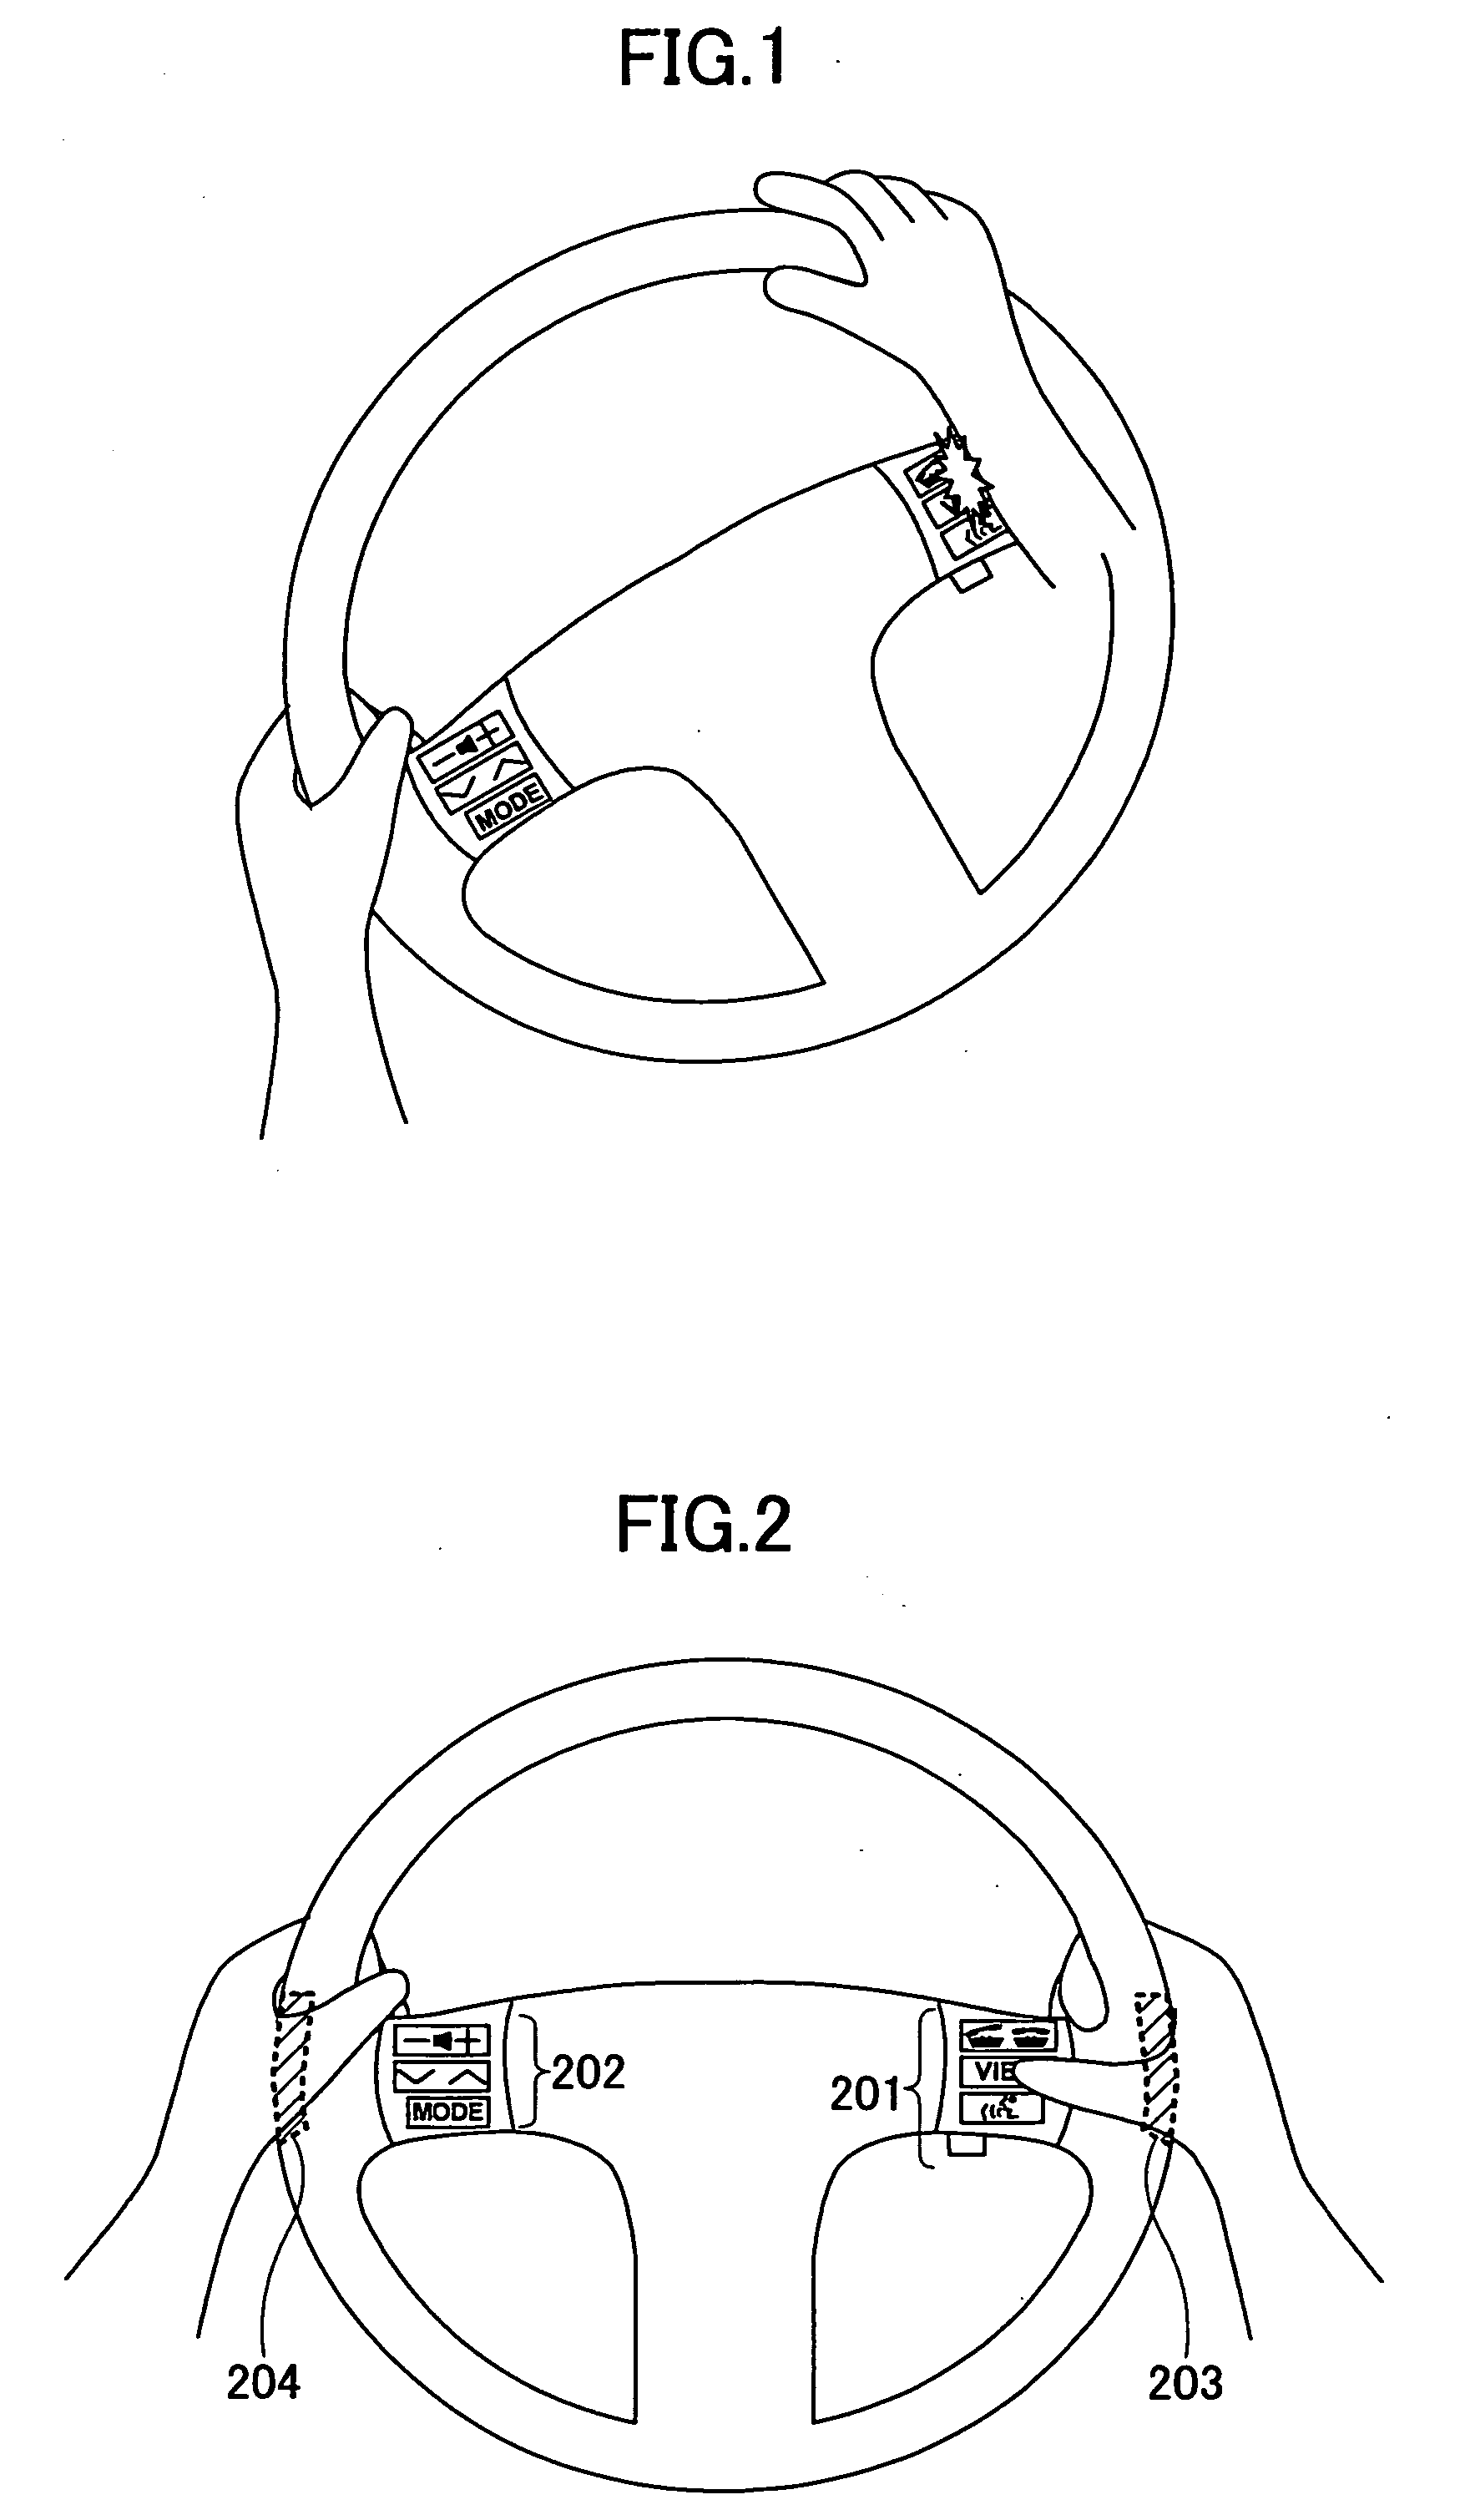 In-vehicle display device